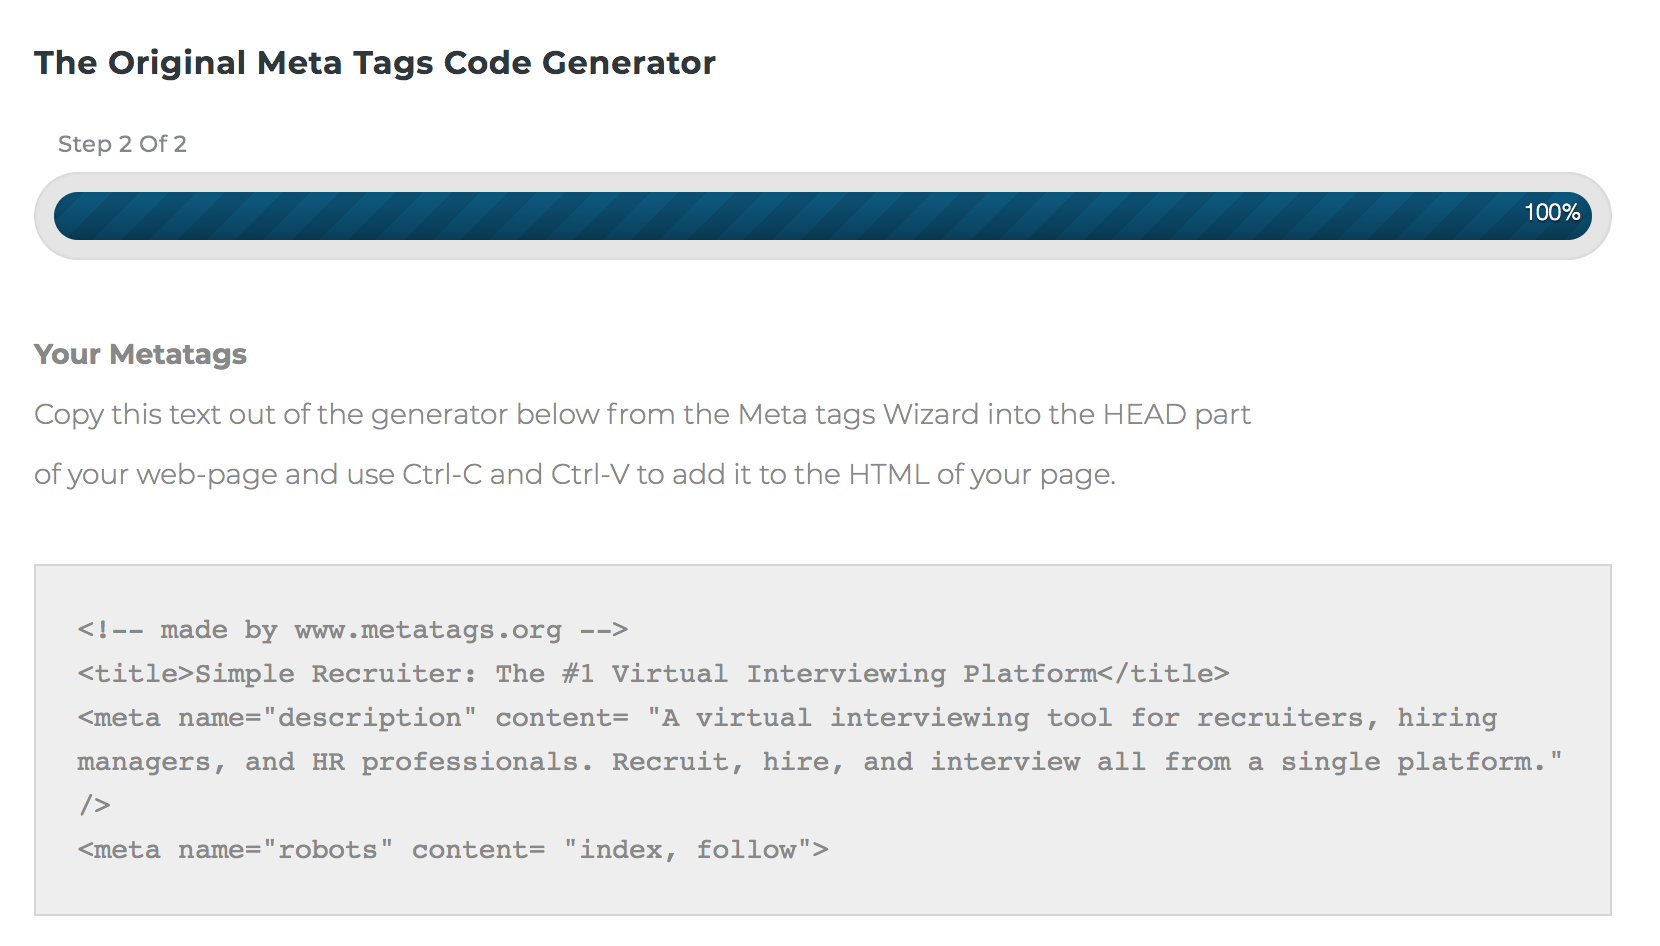 meta tag generator output from Metatags.org.